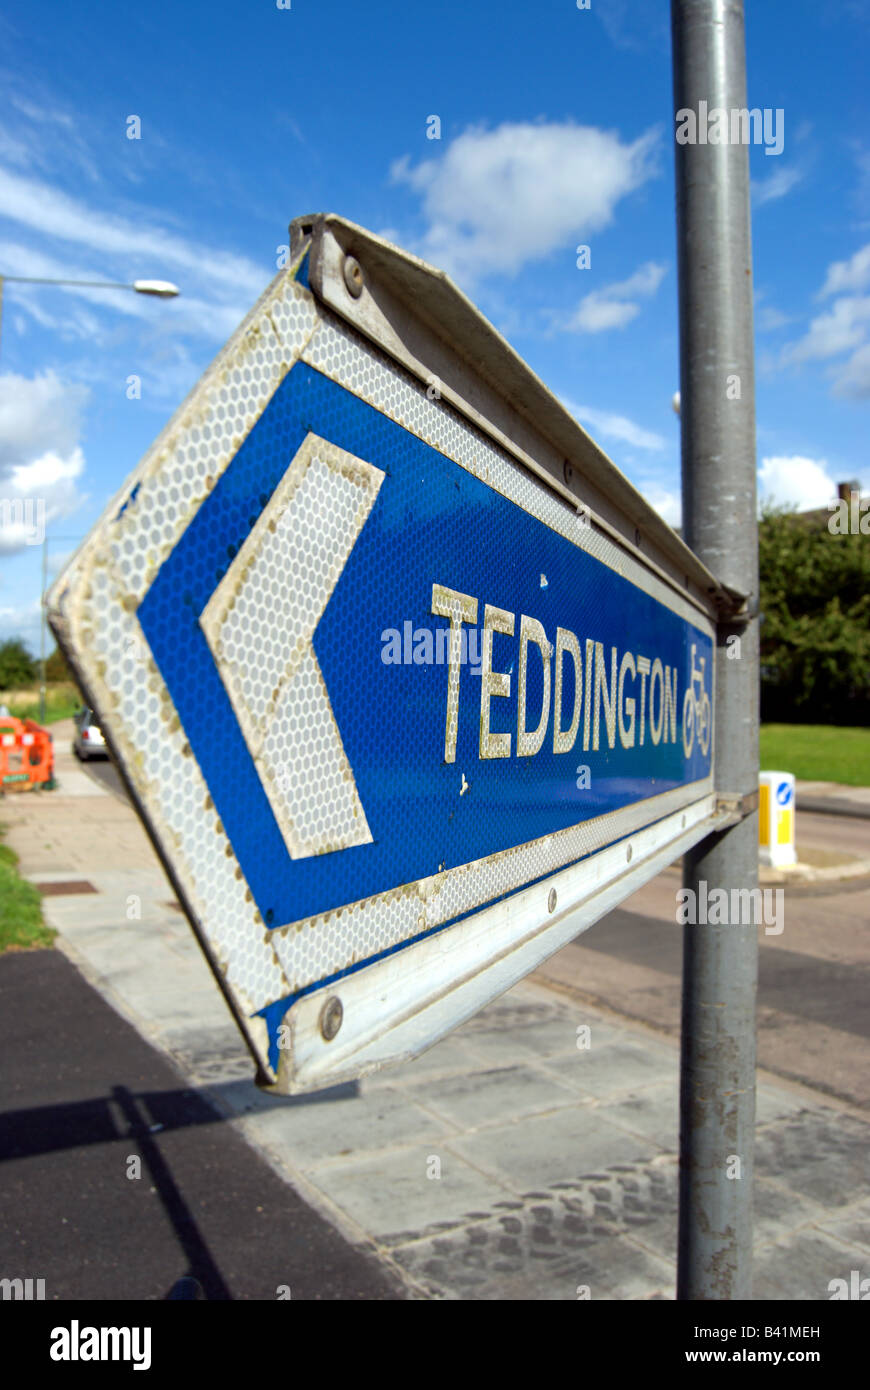 blue and white cycle route sign for teddington, middlesex, located in ham, southwest london, england Stock Photo